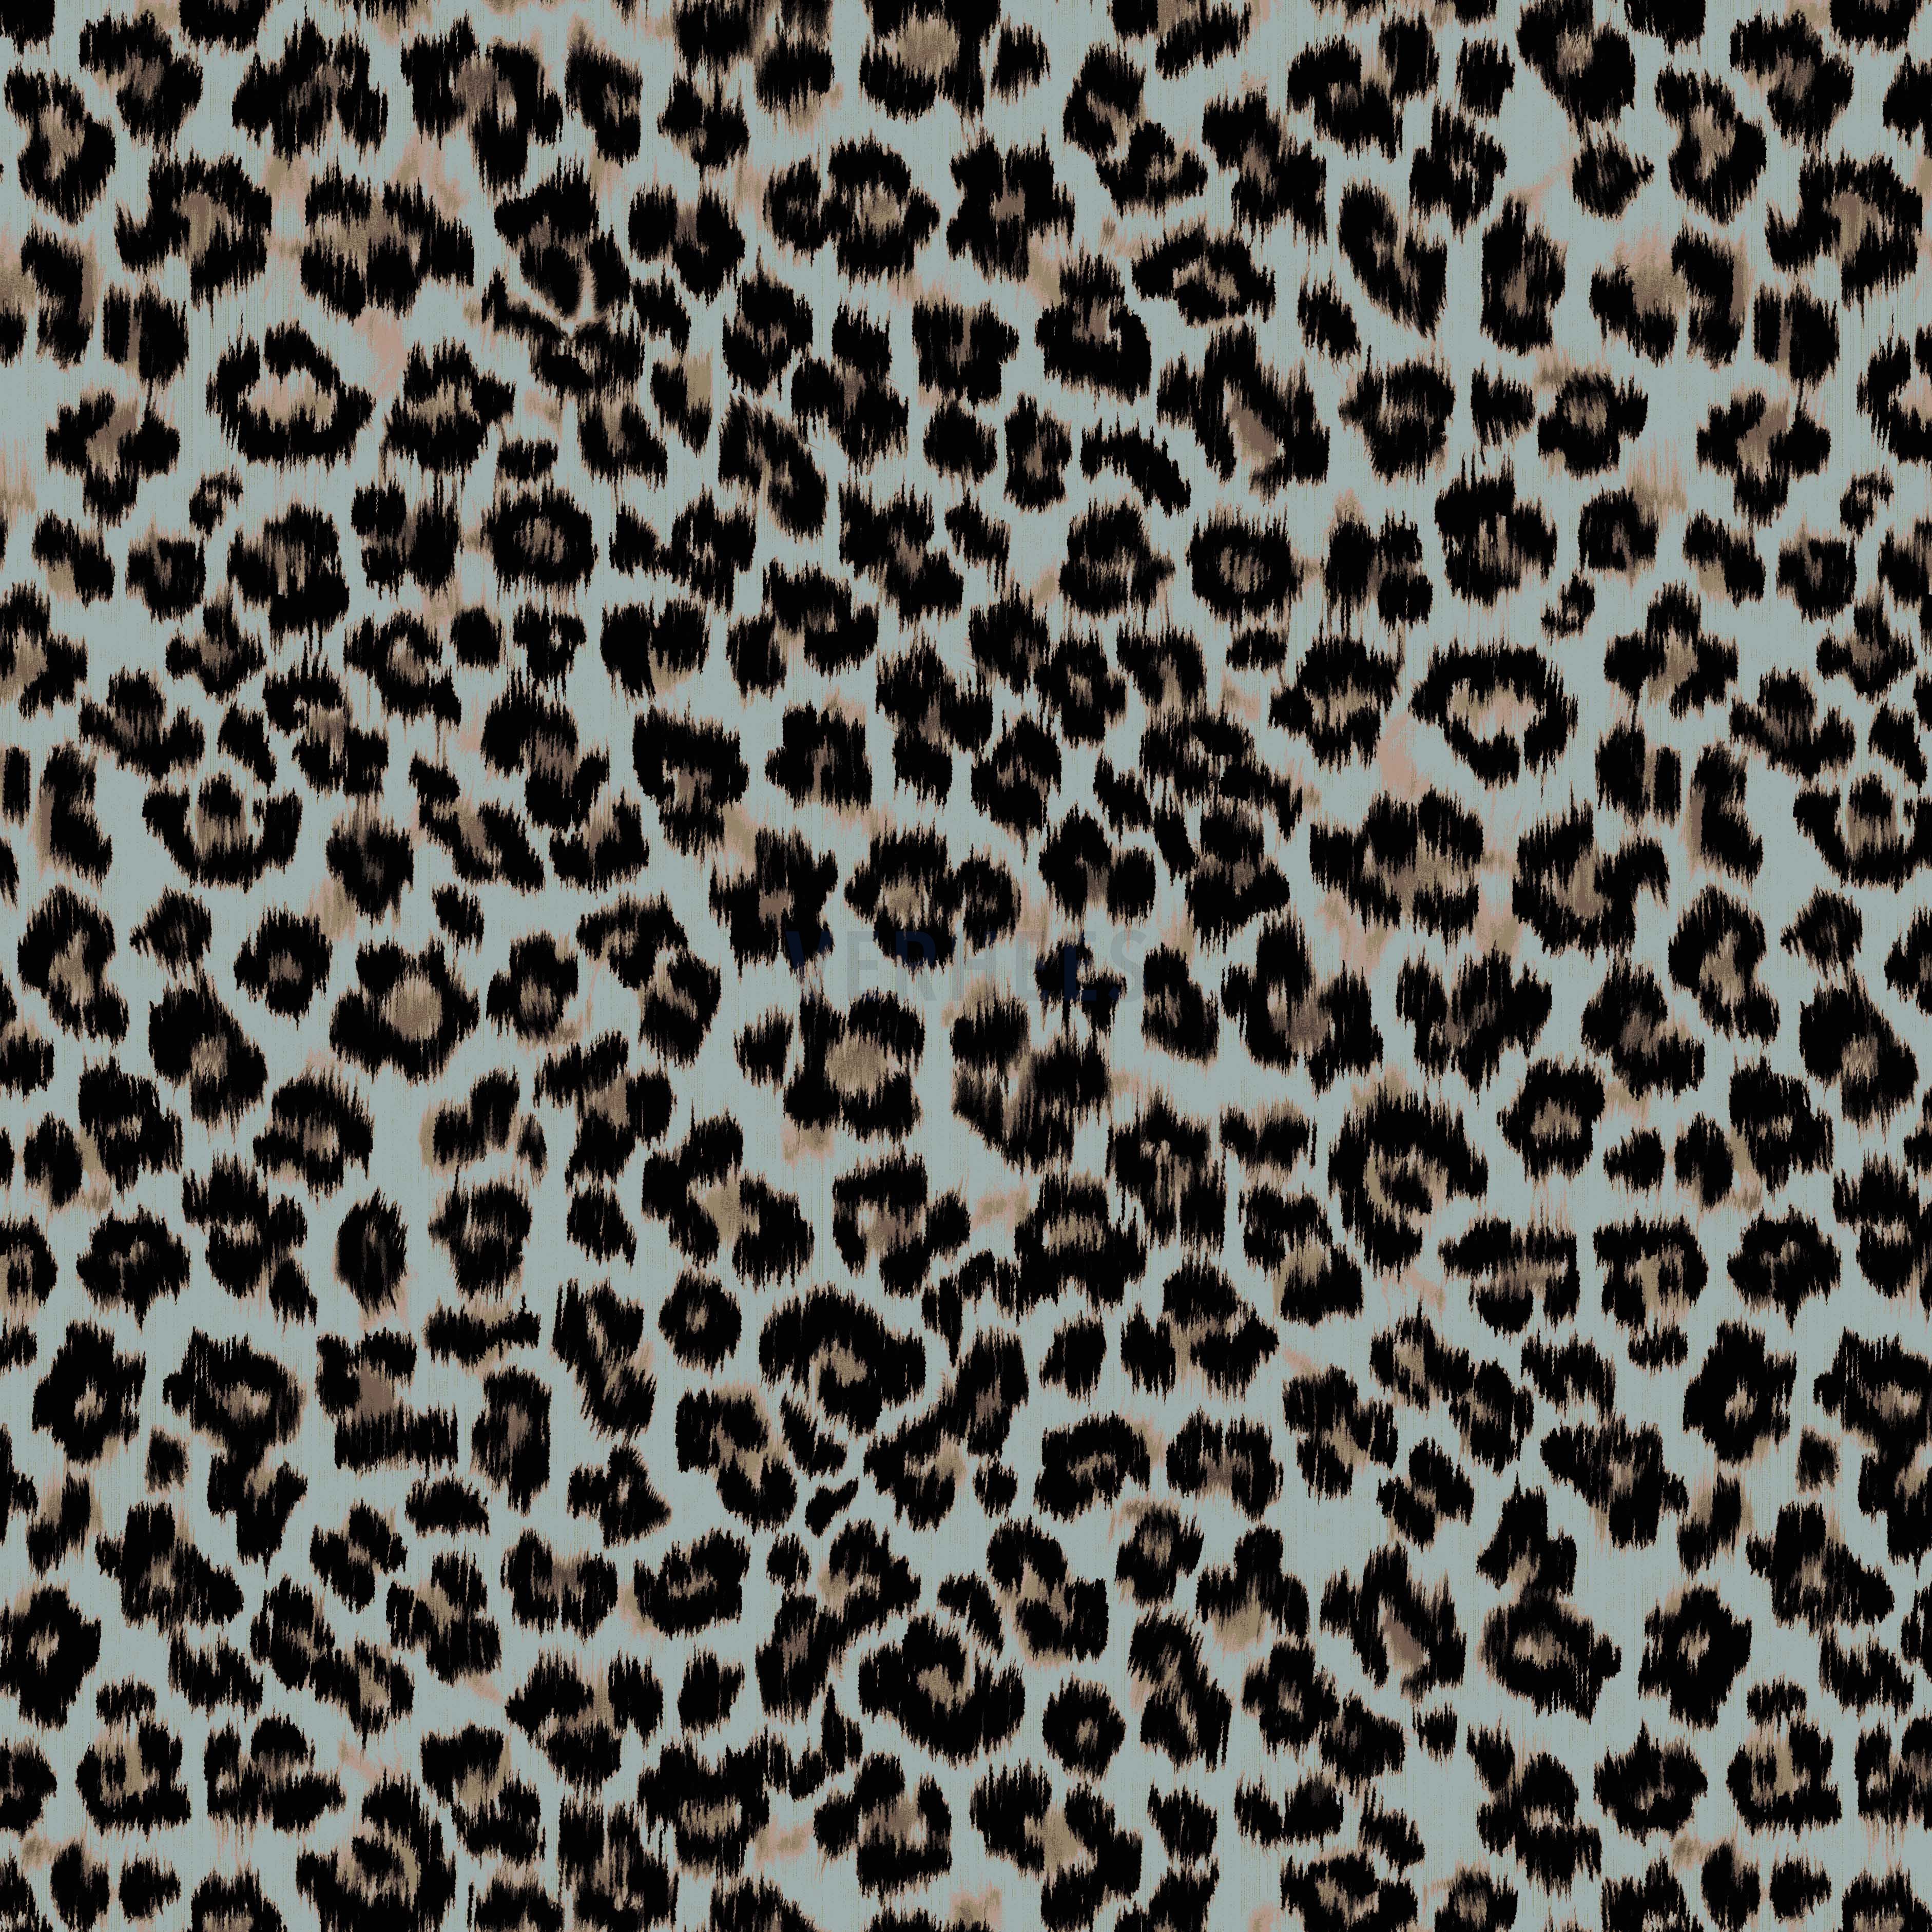 FRENCH TERRY DIGITAL ANIMAL SKIN TEAL (high resolution)